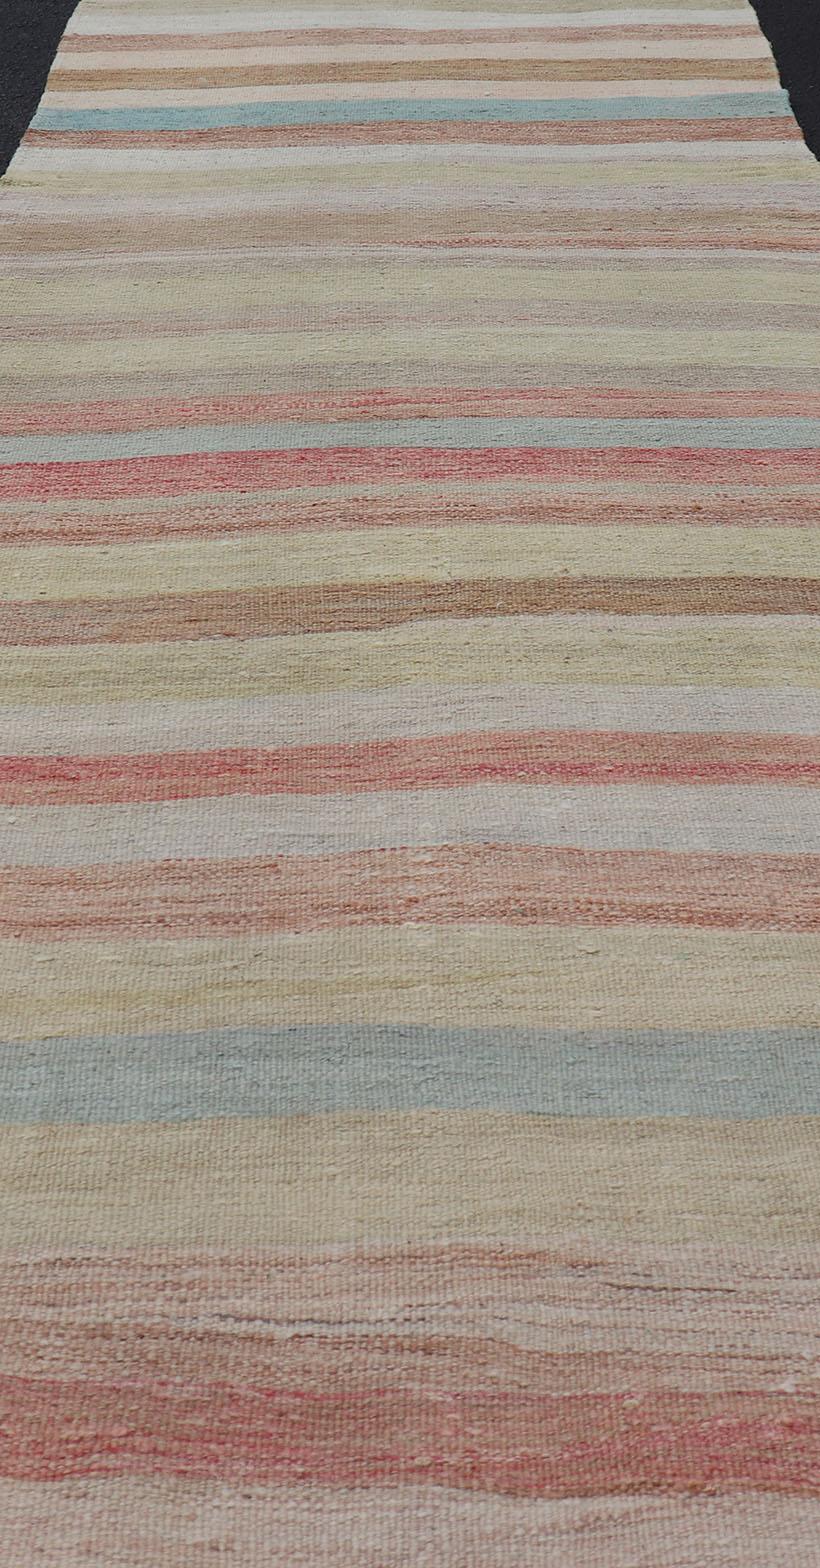 Hand-Woven Very Long Vintage Turkish Kilim Runner with Stripe Design in Soft Colors  For Sale